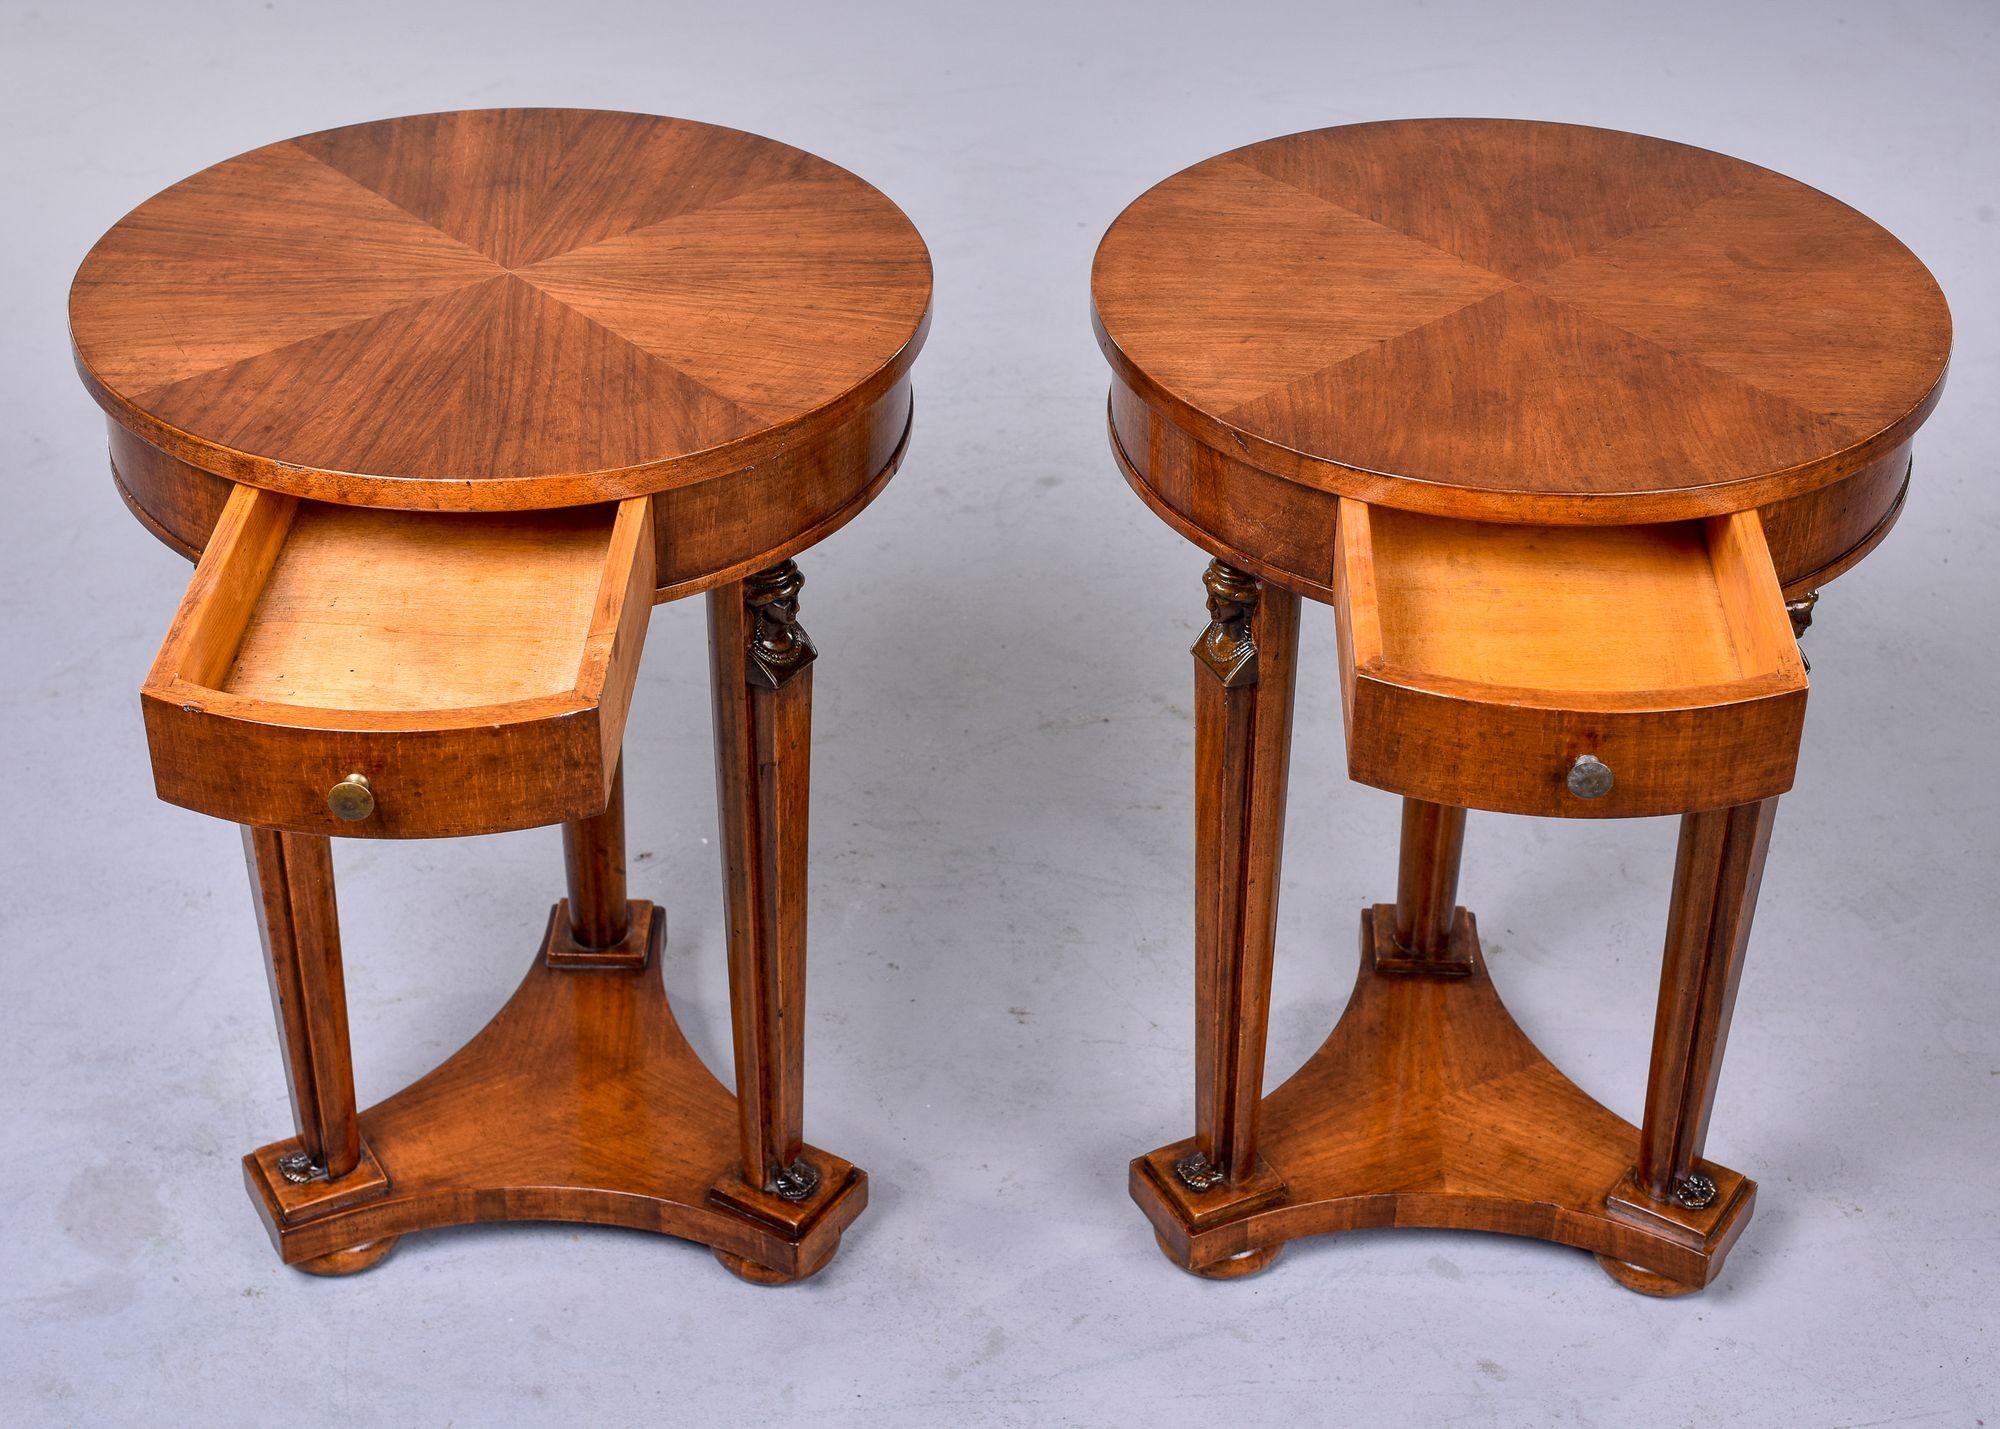 Pair Louis XVI Style round mahogany side tables
 
Found in France, this pair of Louis XVI style side tables date from approximately 1900. Each of these round tables has a decorative veneer pattern on top, small functional drawer and carved,